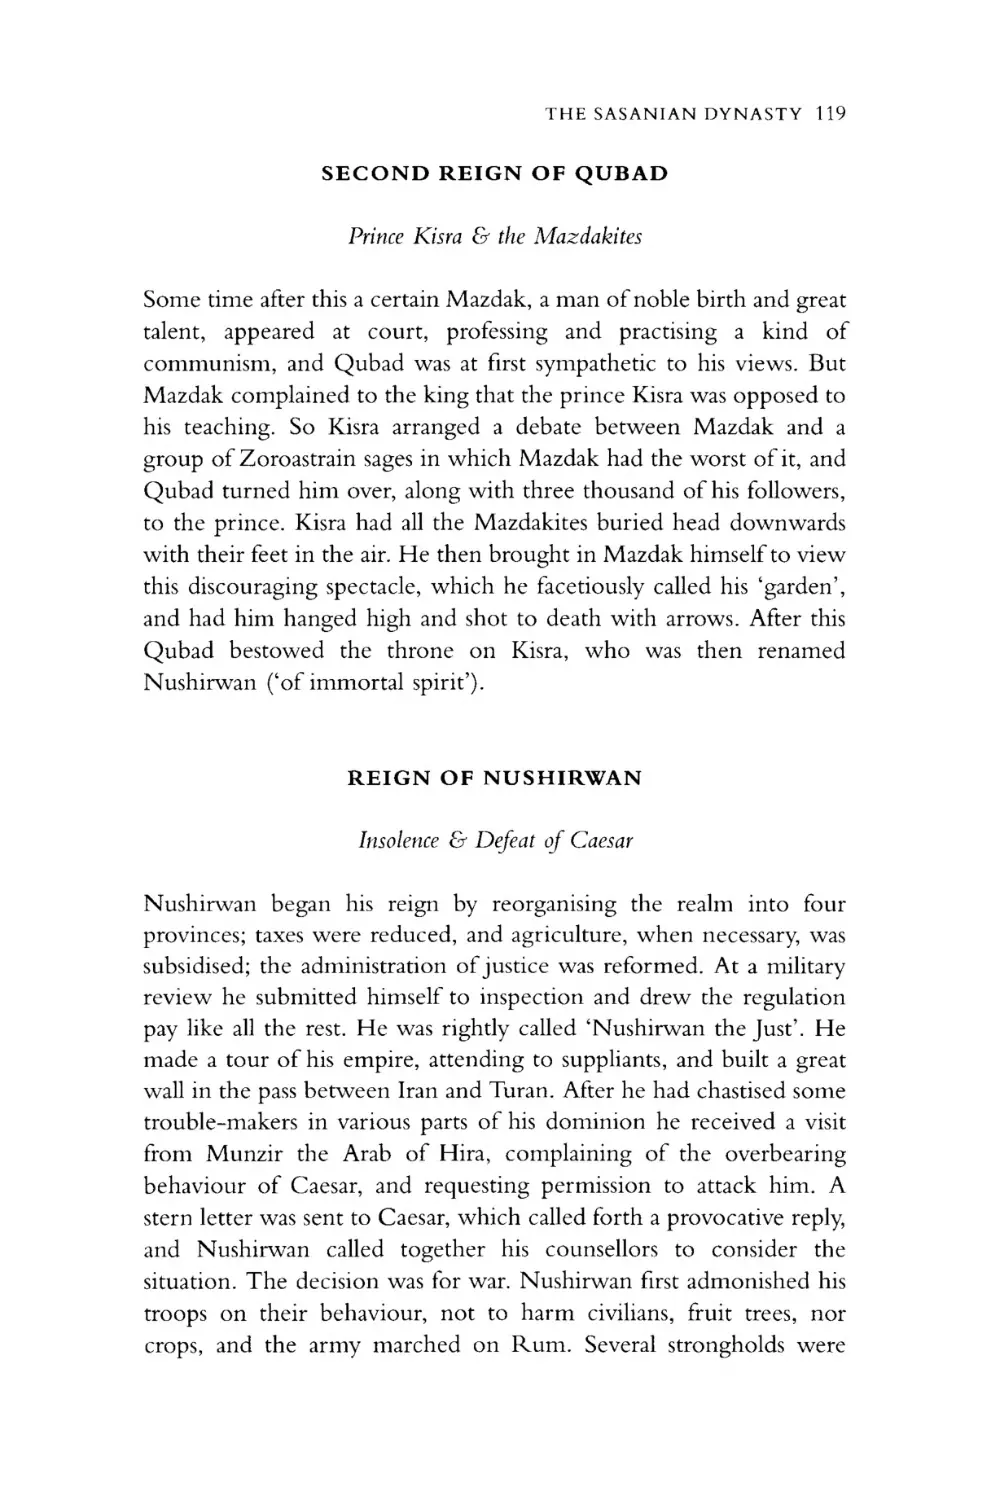 SECOND REIGN OF QUBAD
Prince Kisra & the Mazdakites
REIGN OF NUSHIRWAN
Insolence & Defeat of Caesar